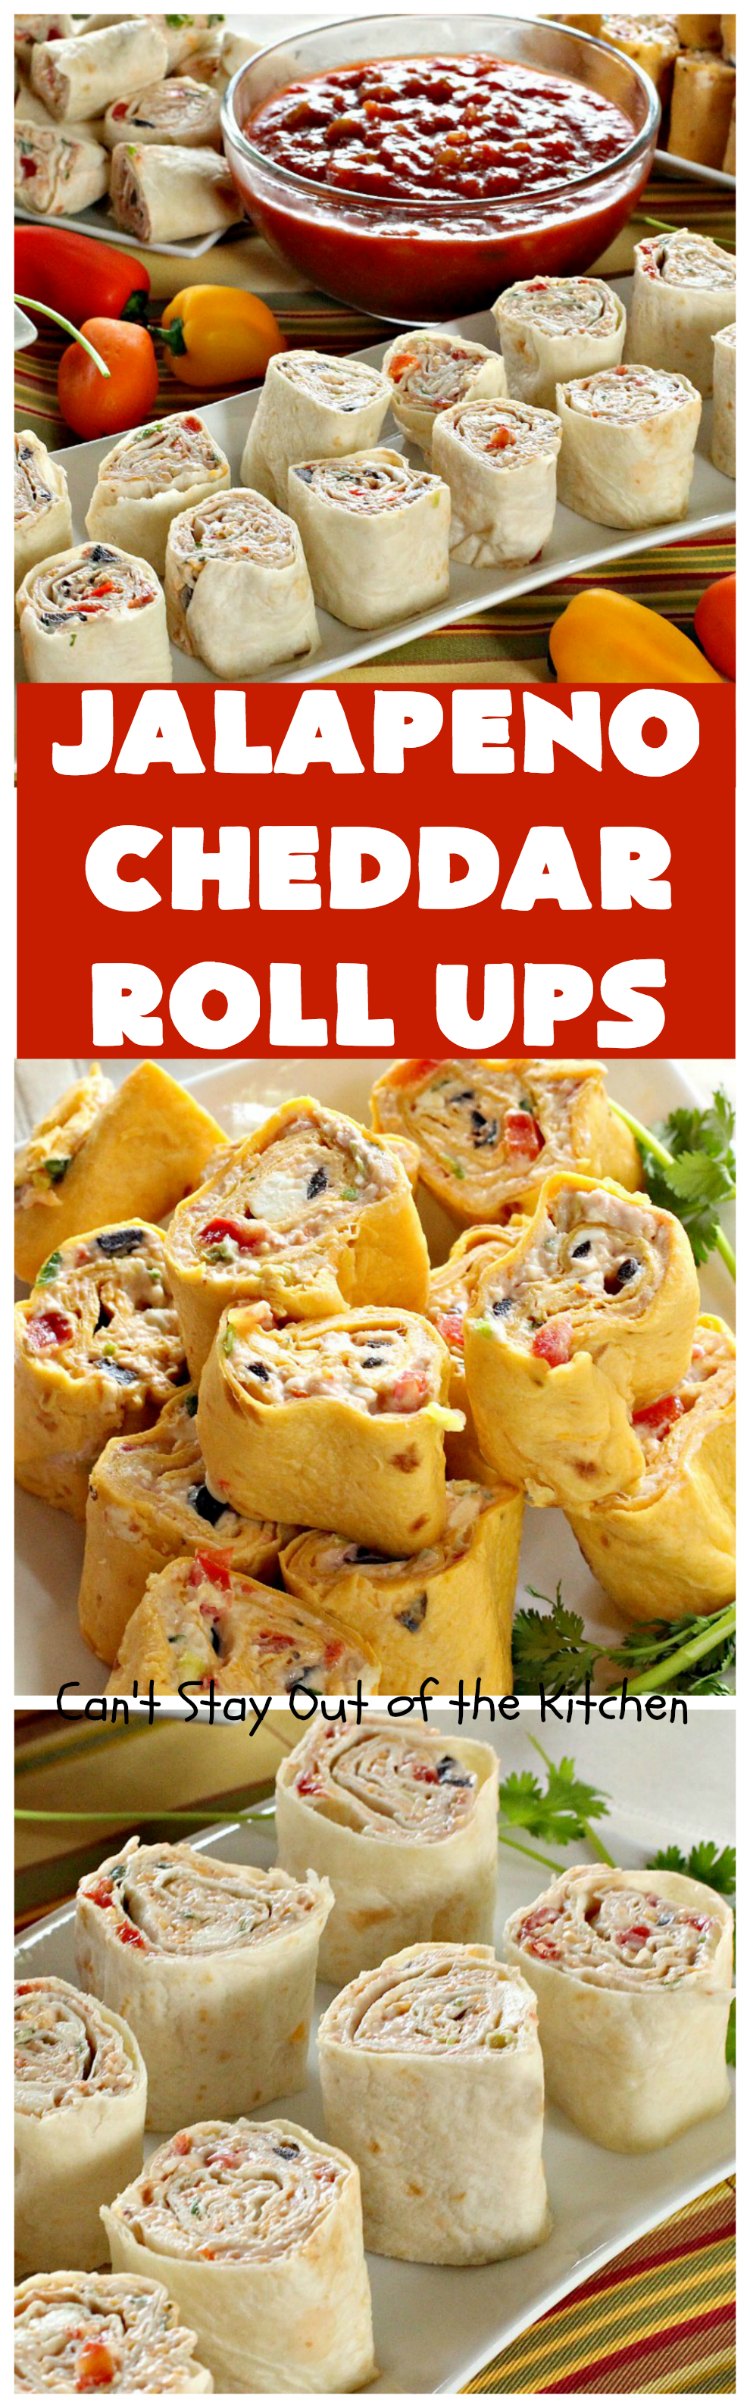 Jalapeno Cheddar Roll Ups | Can't Stay Out of the Kitchen